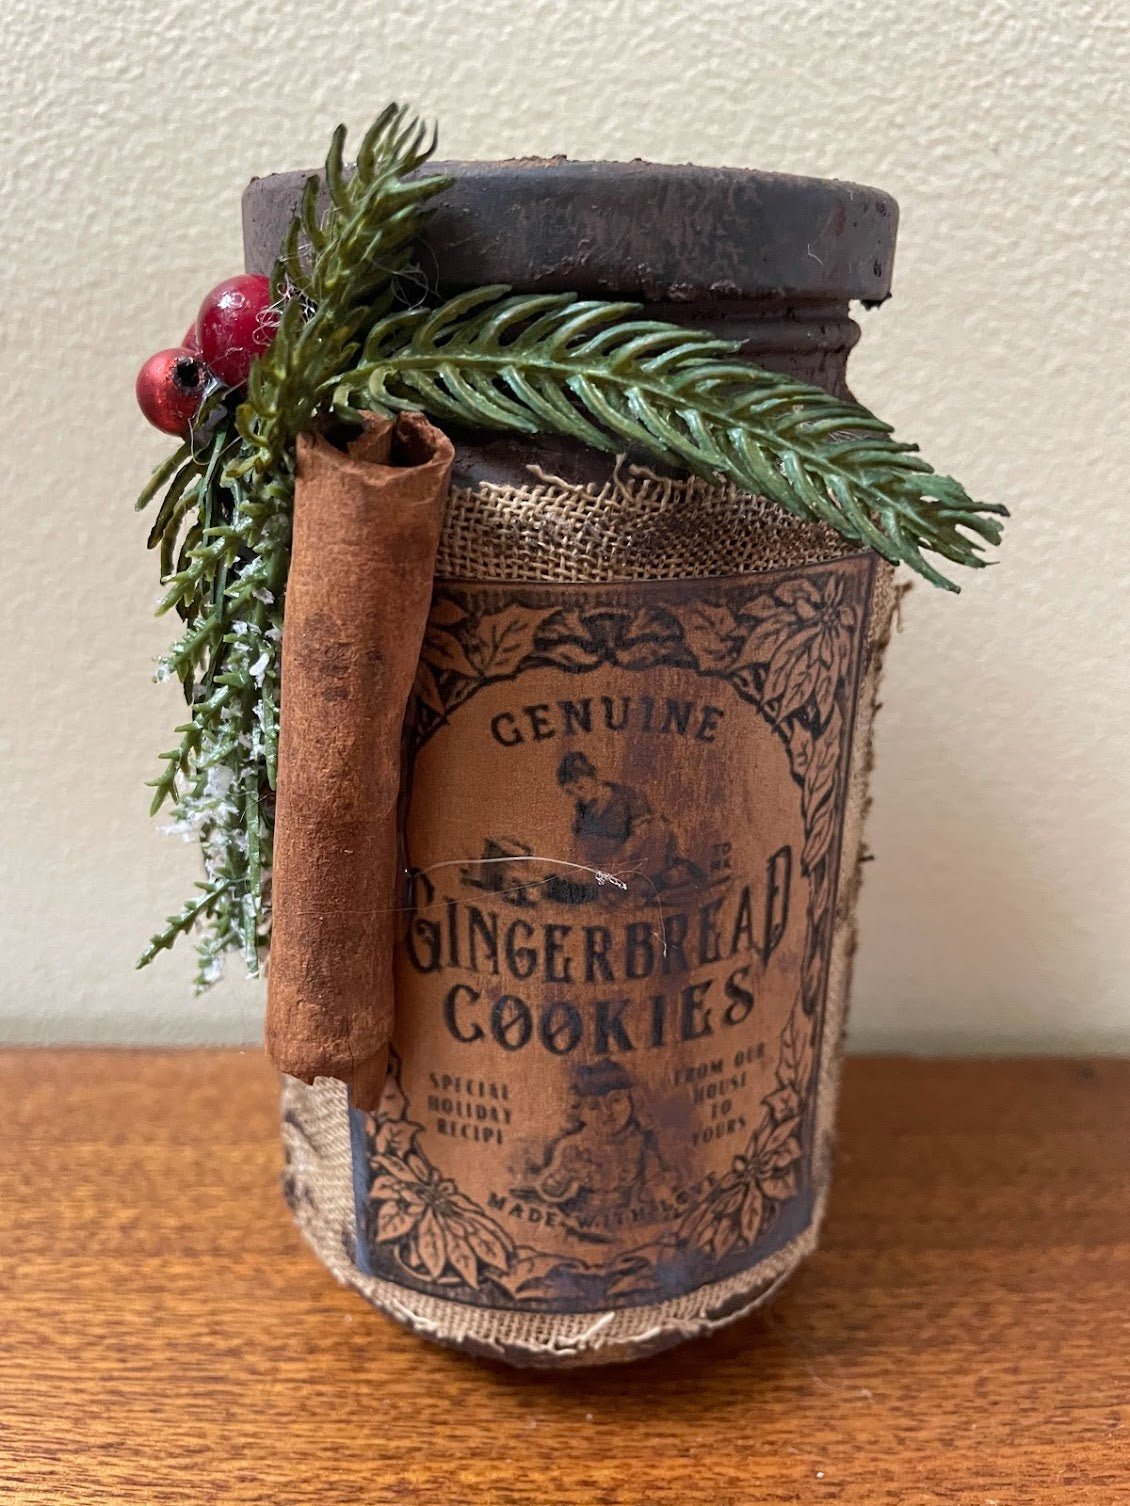 Primitive Handcrafted Colonial Christmas Gingerbread Cookies Jar - The Primitive Pineapple Collection